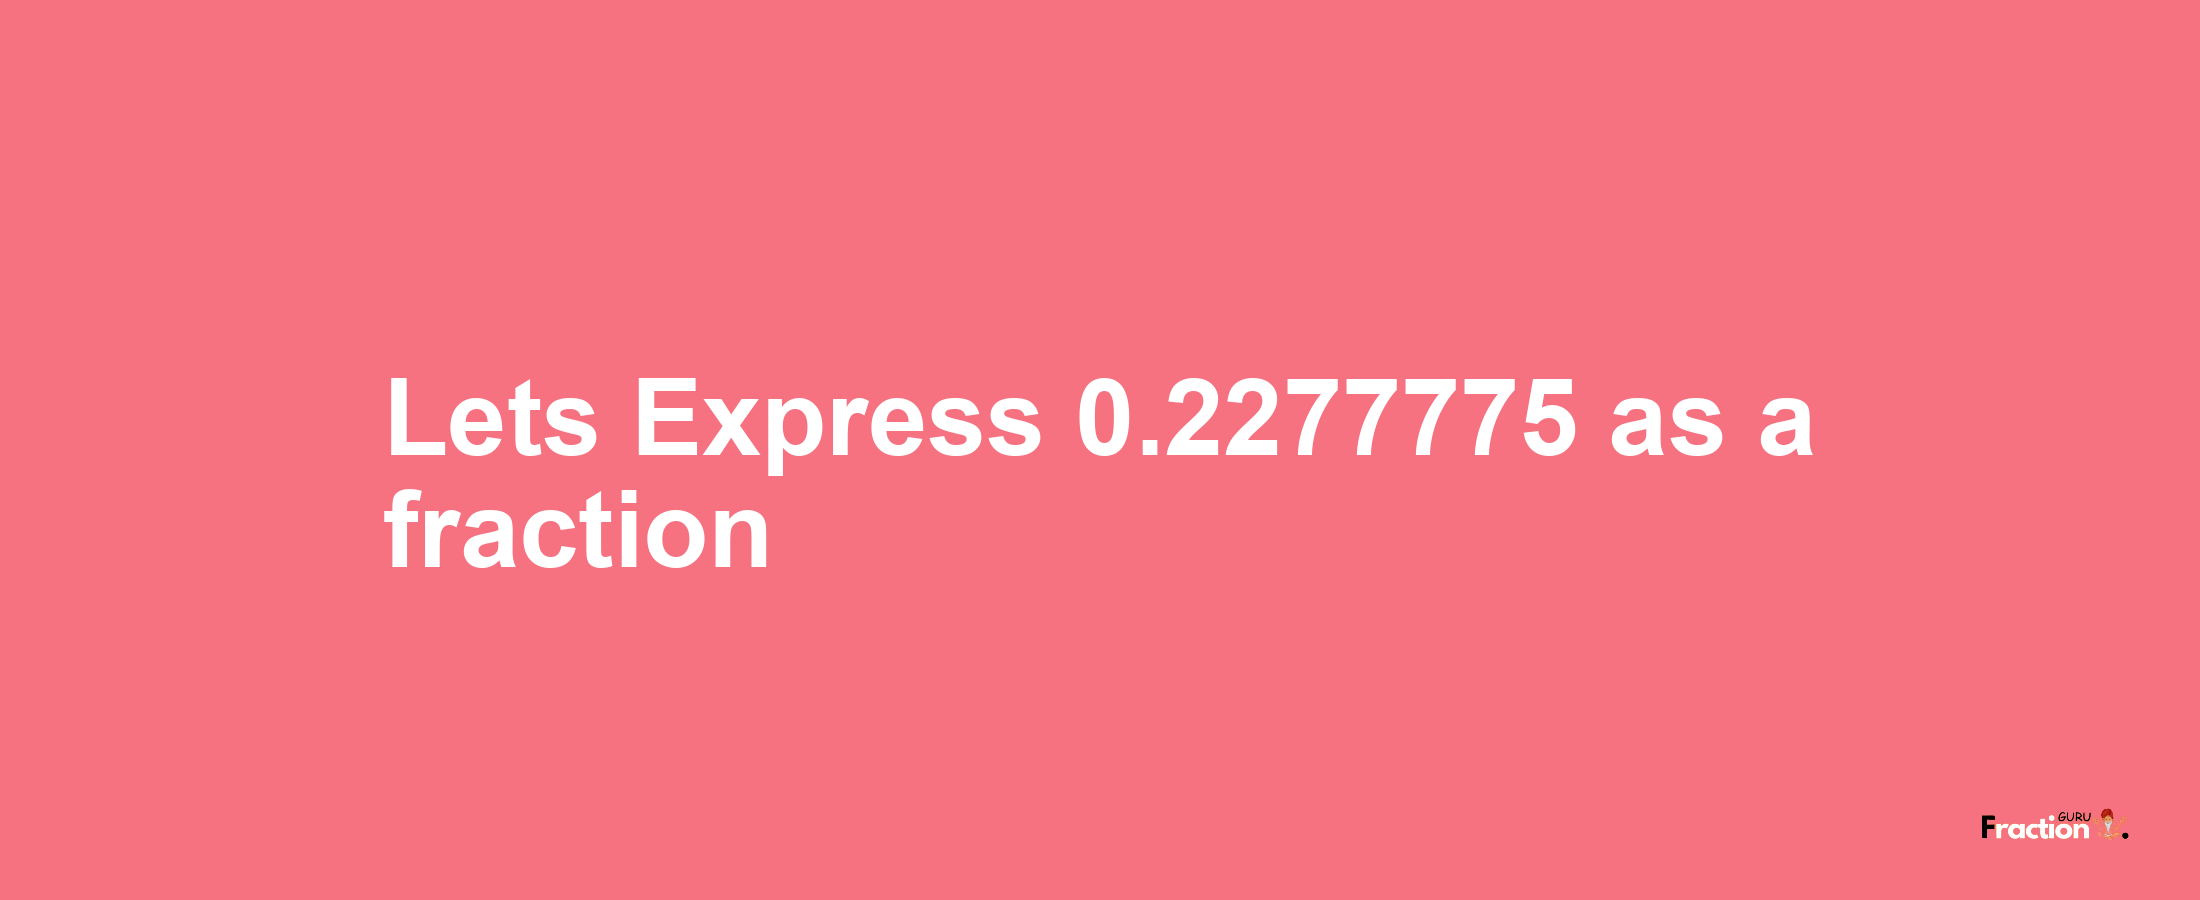 Lets Express 0.2277775 as afraction